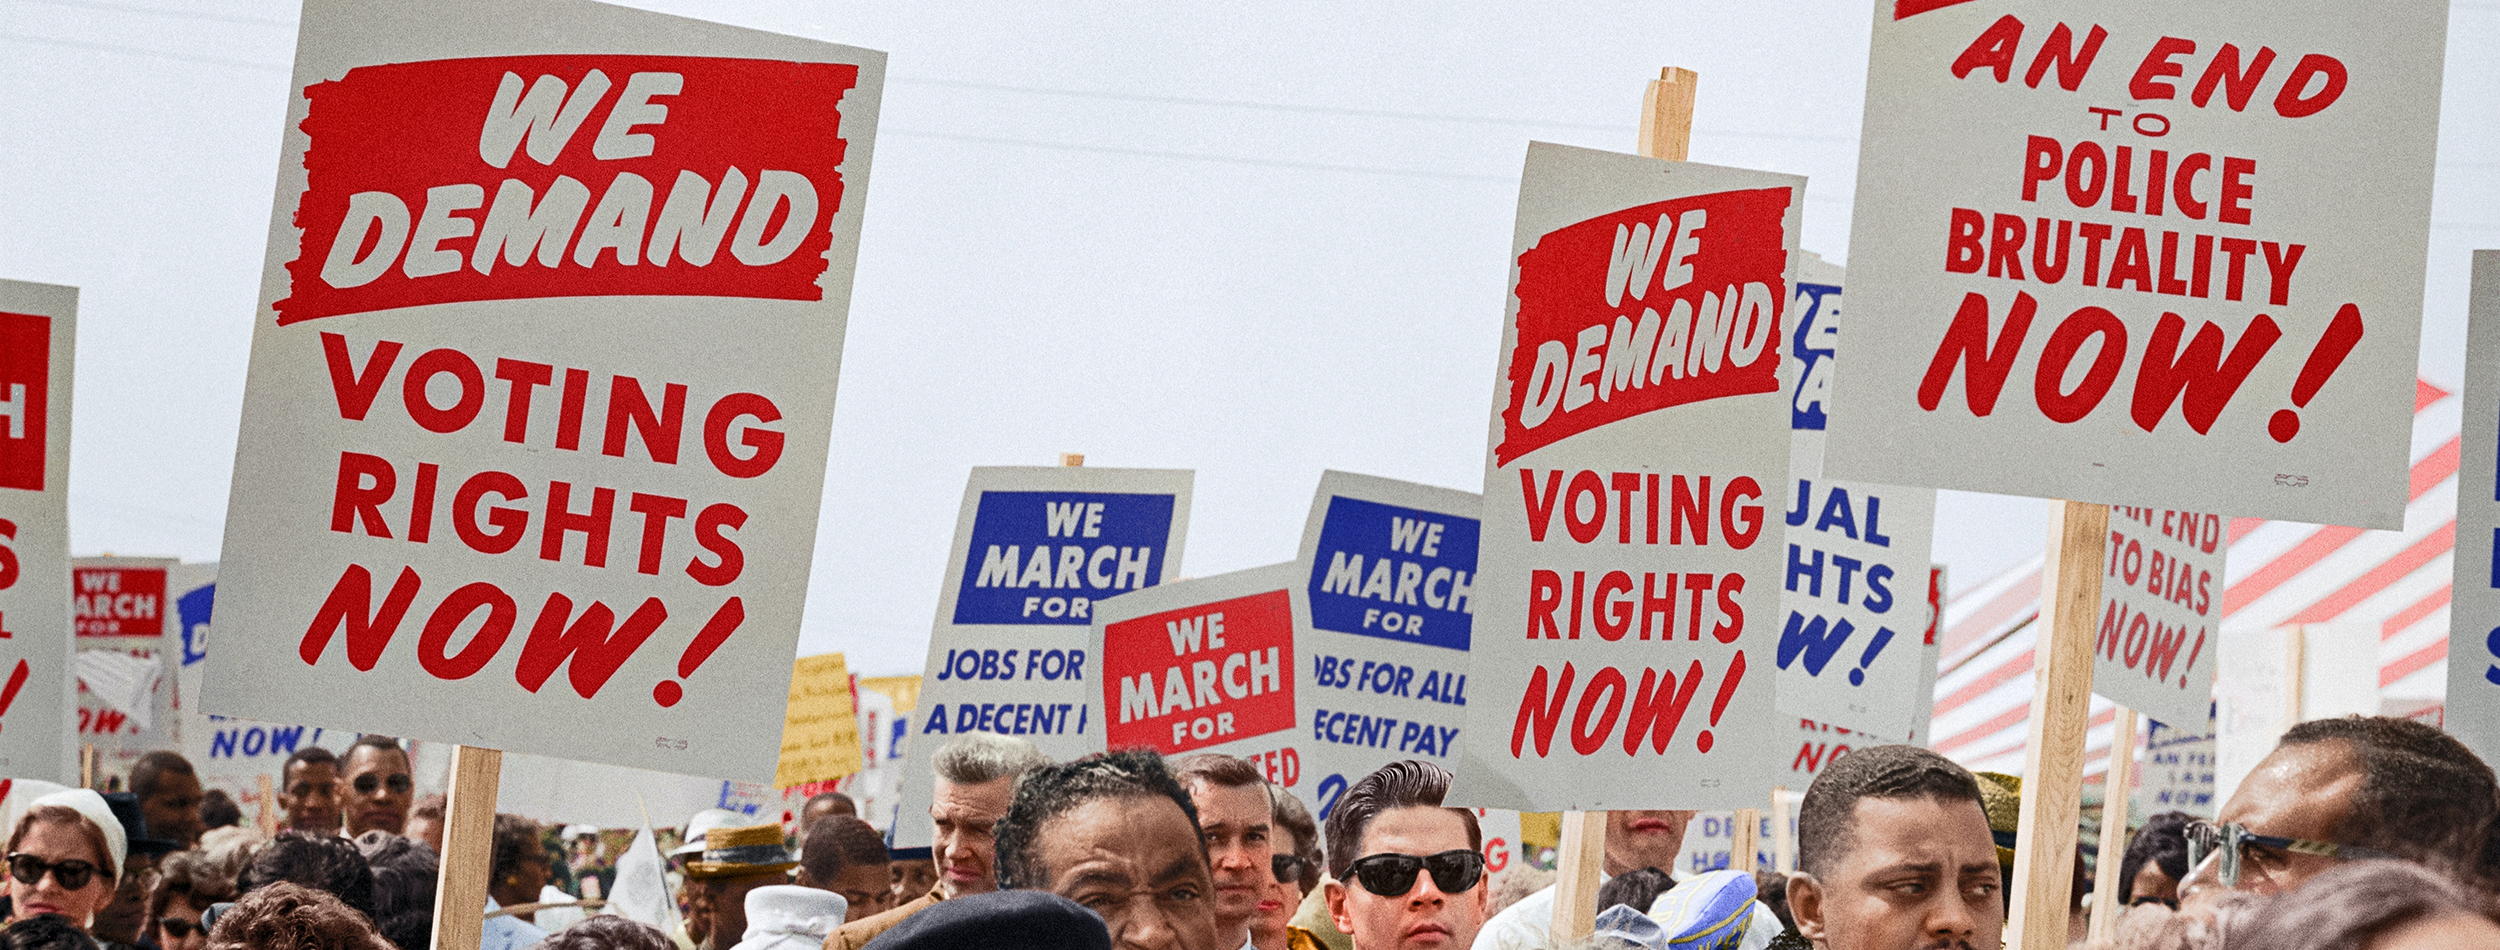 Voting Rights